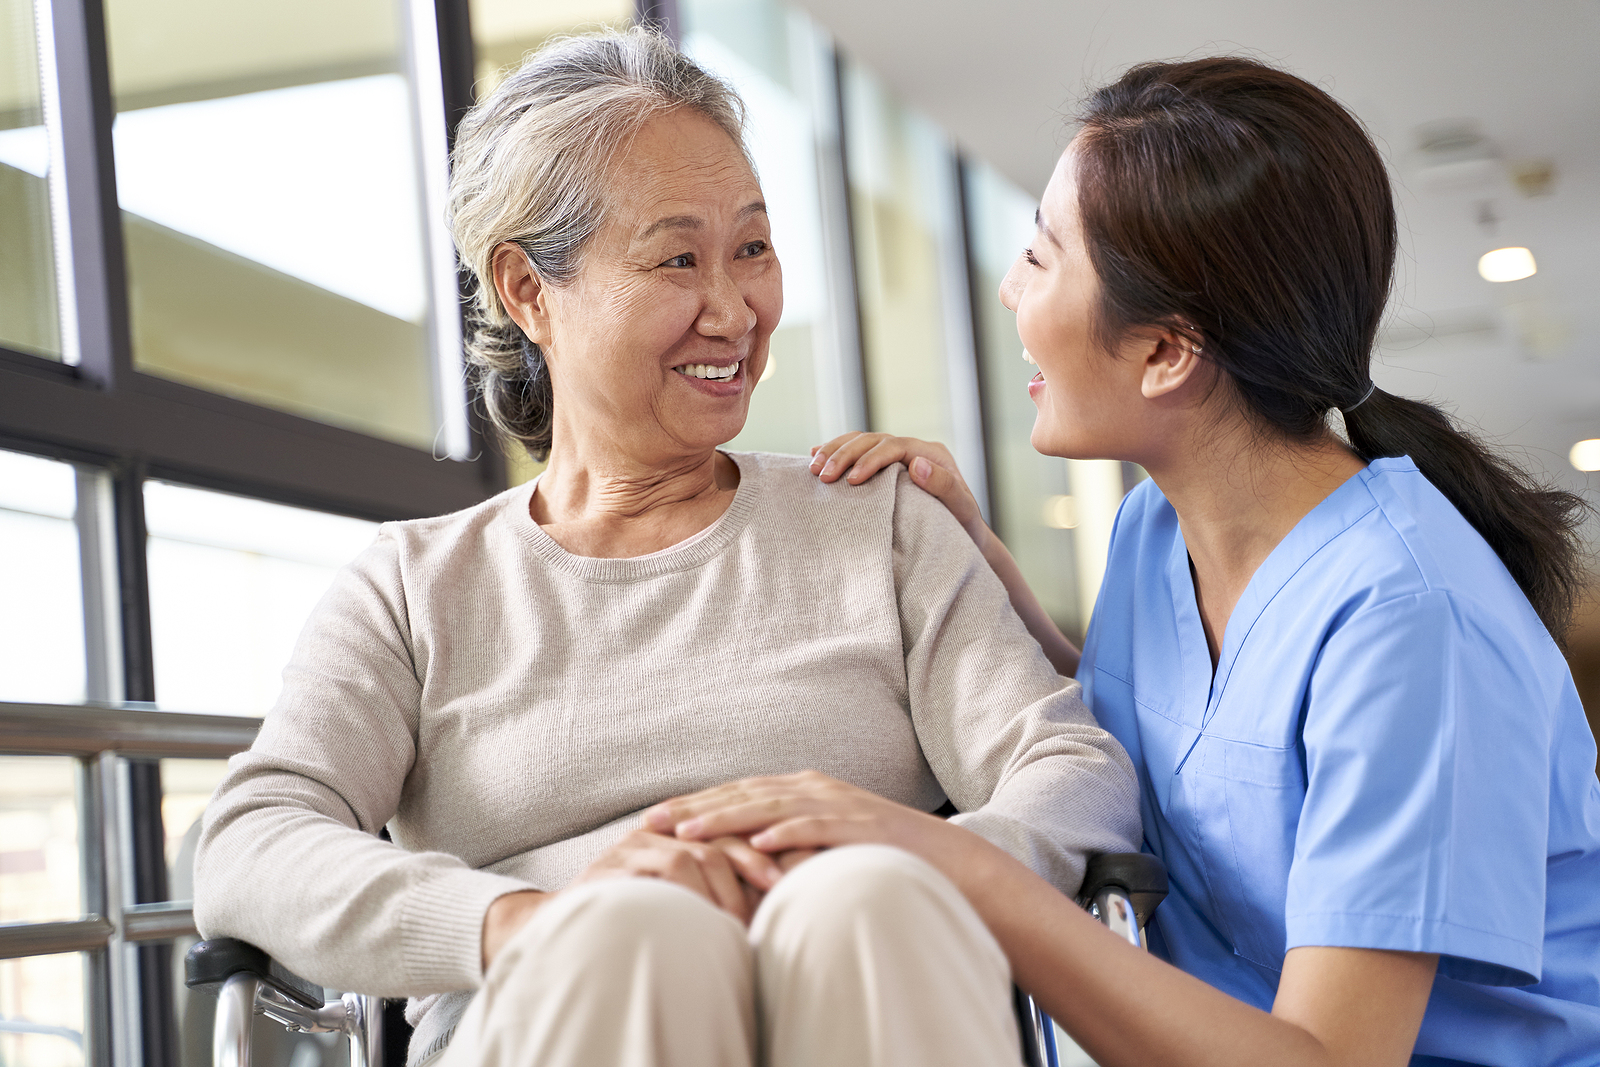 Proactive Steps to Help Your Elderly Loved One Stay Healthy.